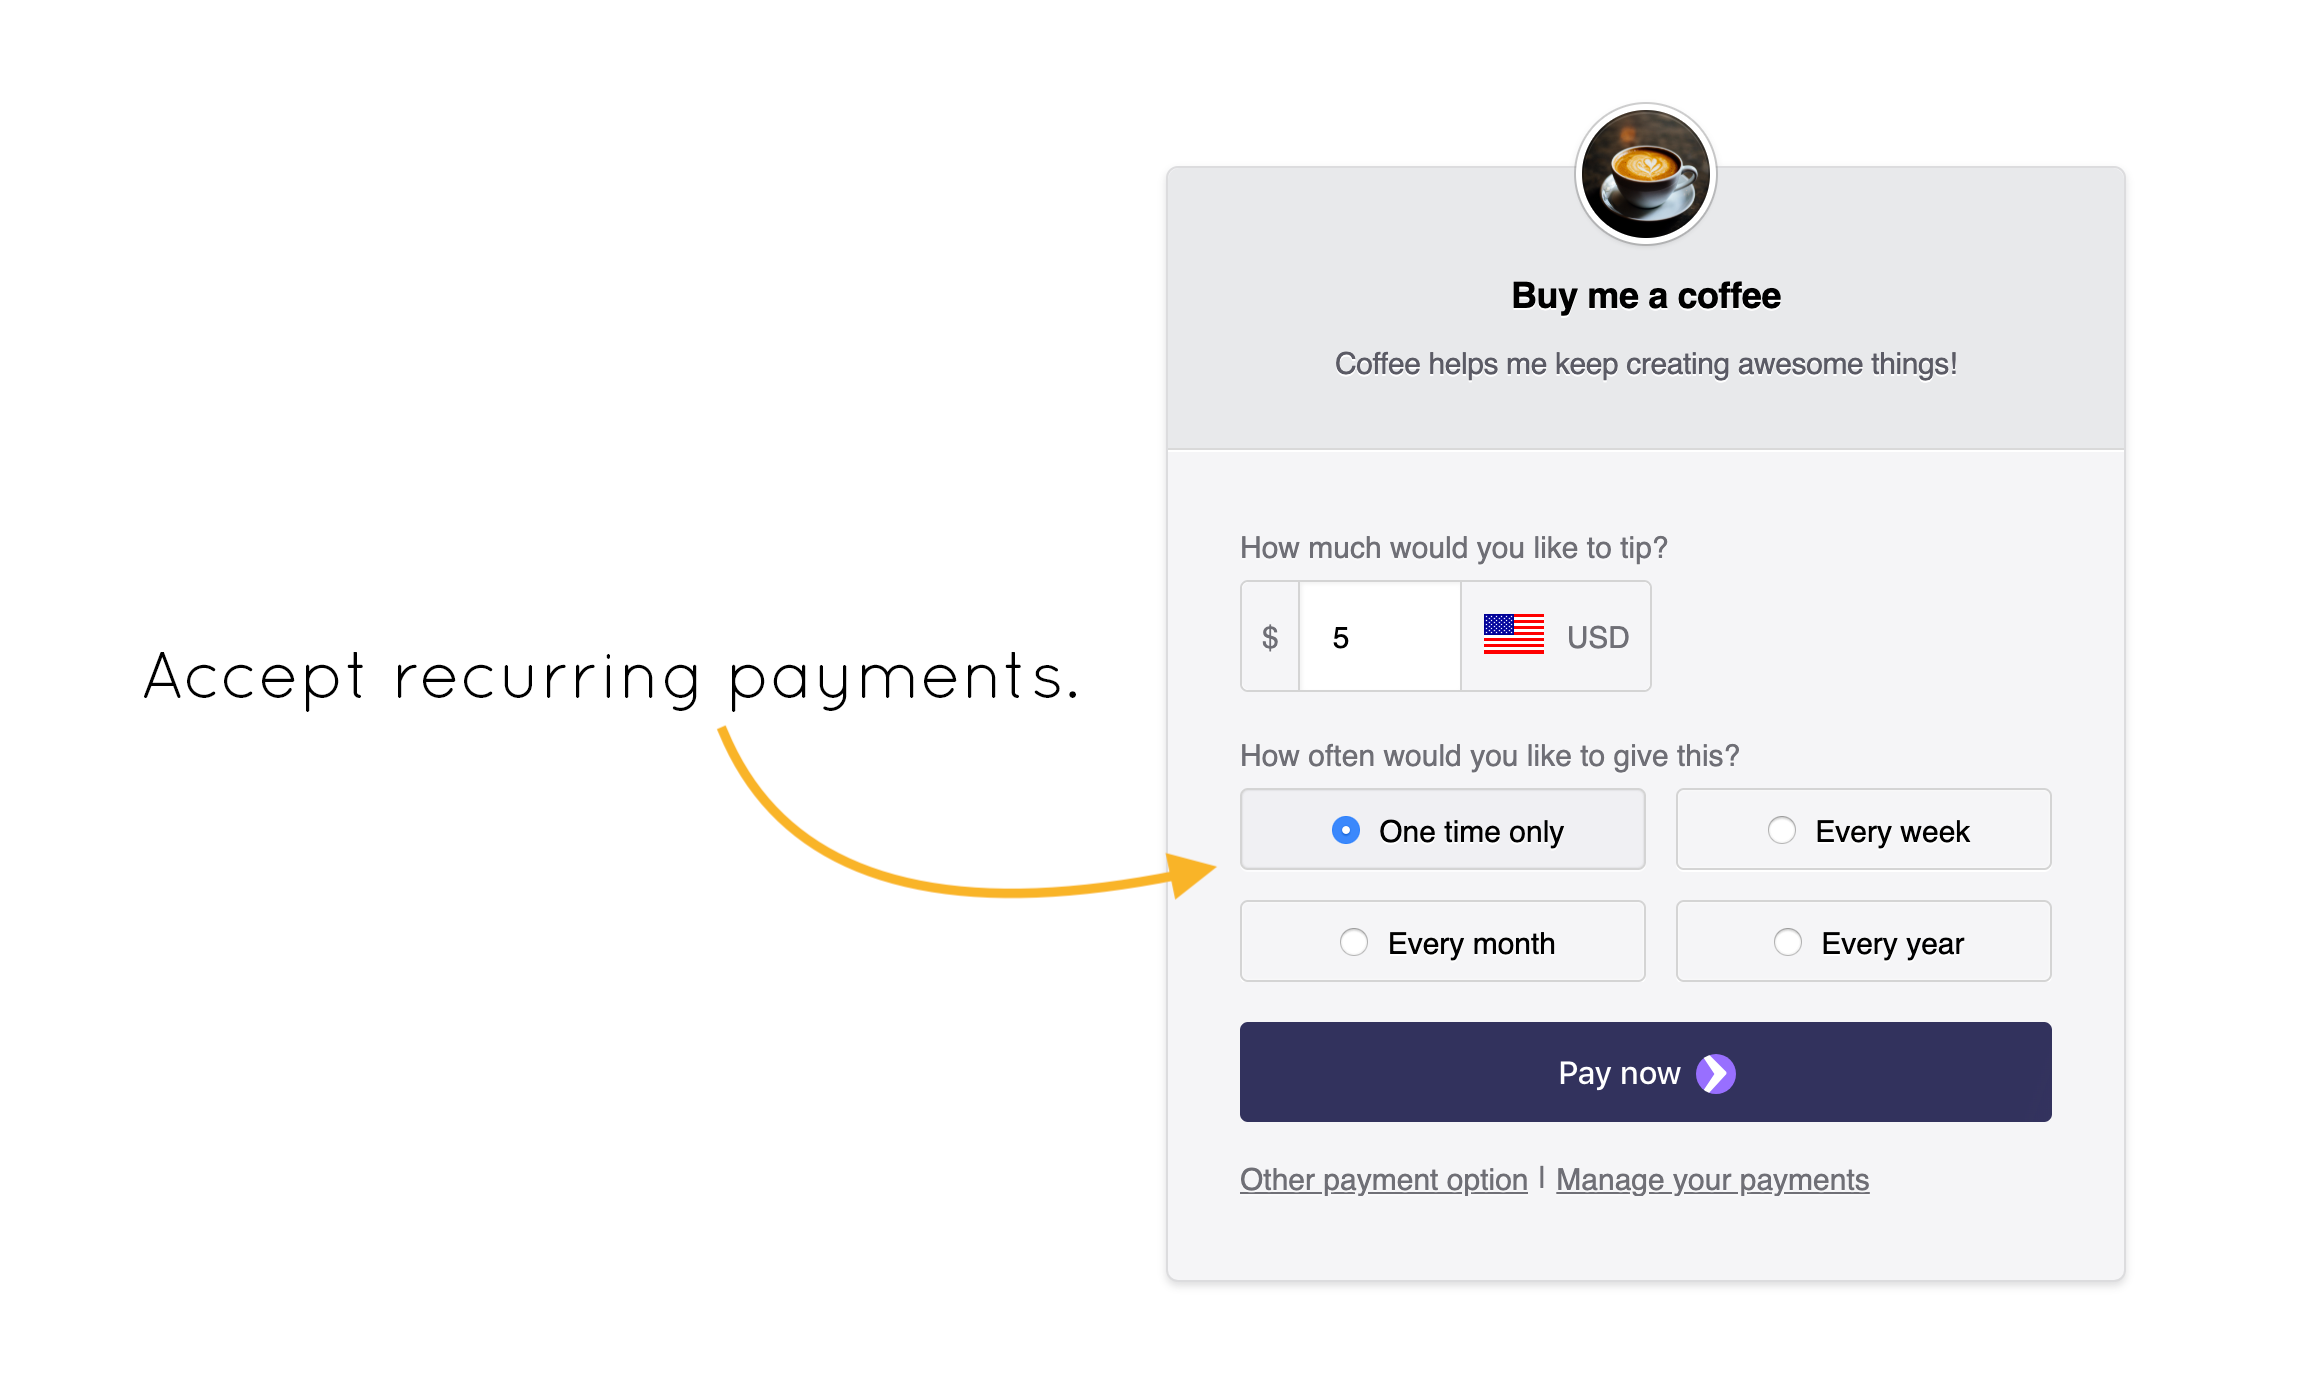 User accounts are automatically generated when a payment happens, reducing user friction during purchase.